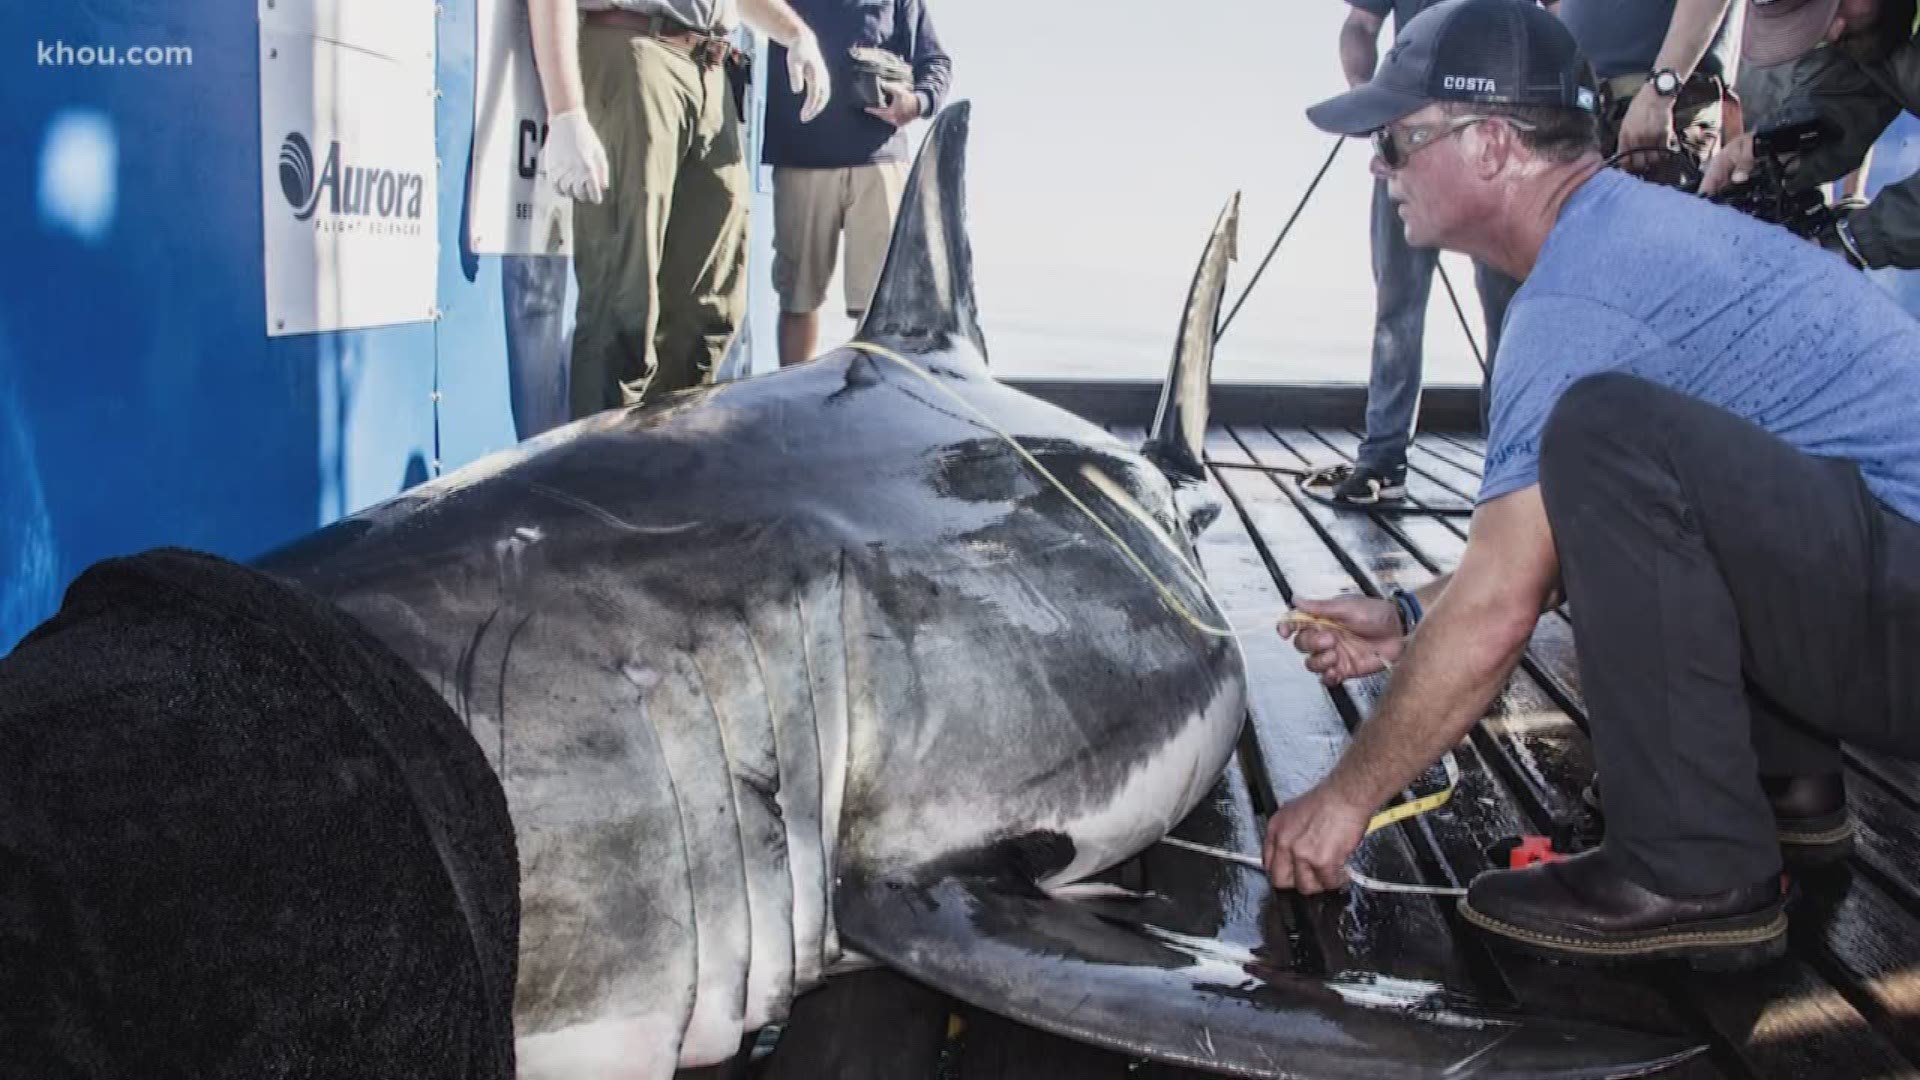 A massive great white shark named Miss Costa was spotted off the coast of Panama City, Florida. It got us wondering if there are any great whites off the Galveston coast.